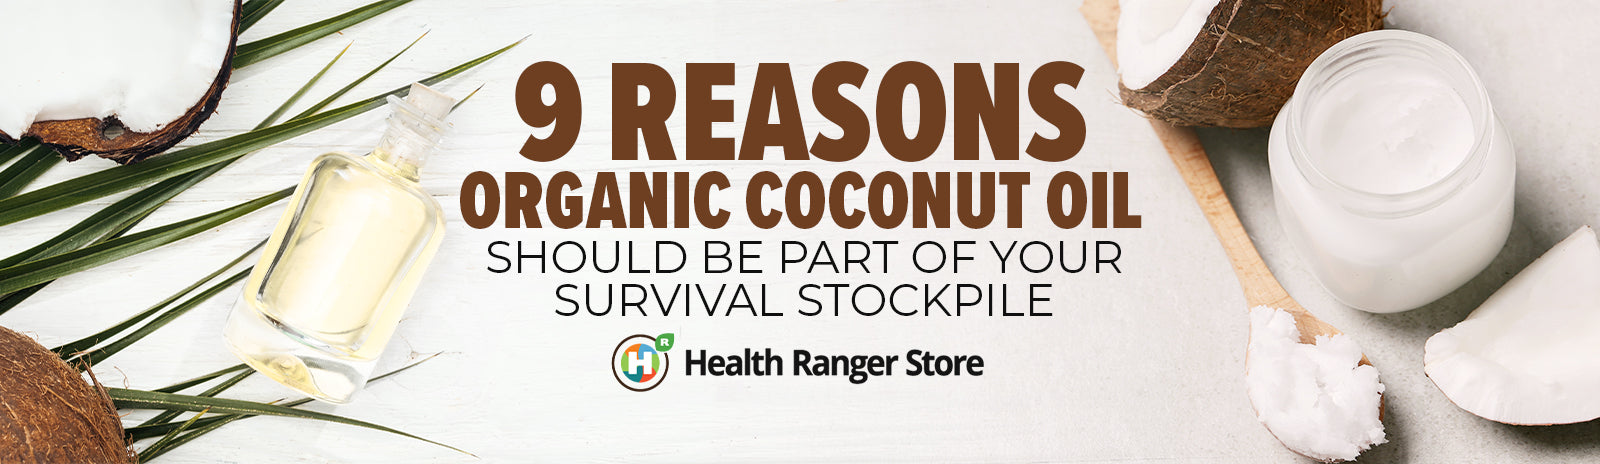 9 Reasons organic coconut oil should be a part of your survival stockpile